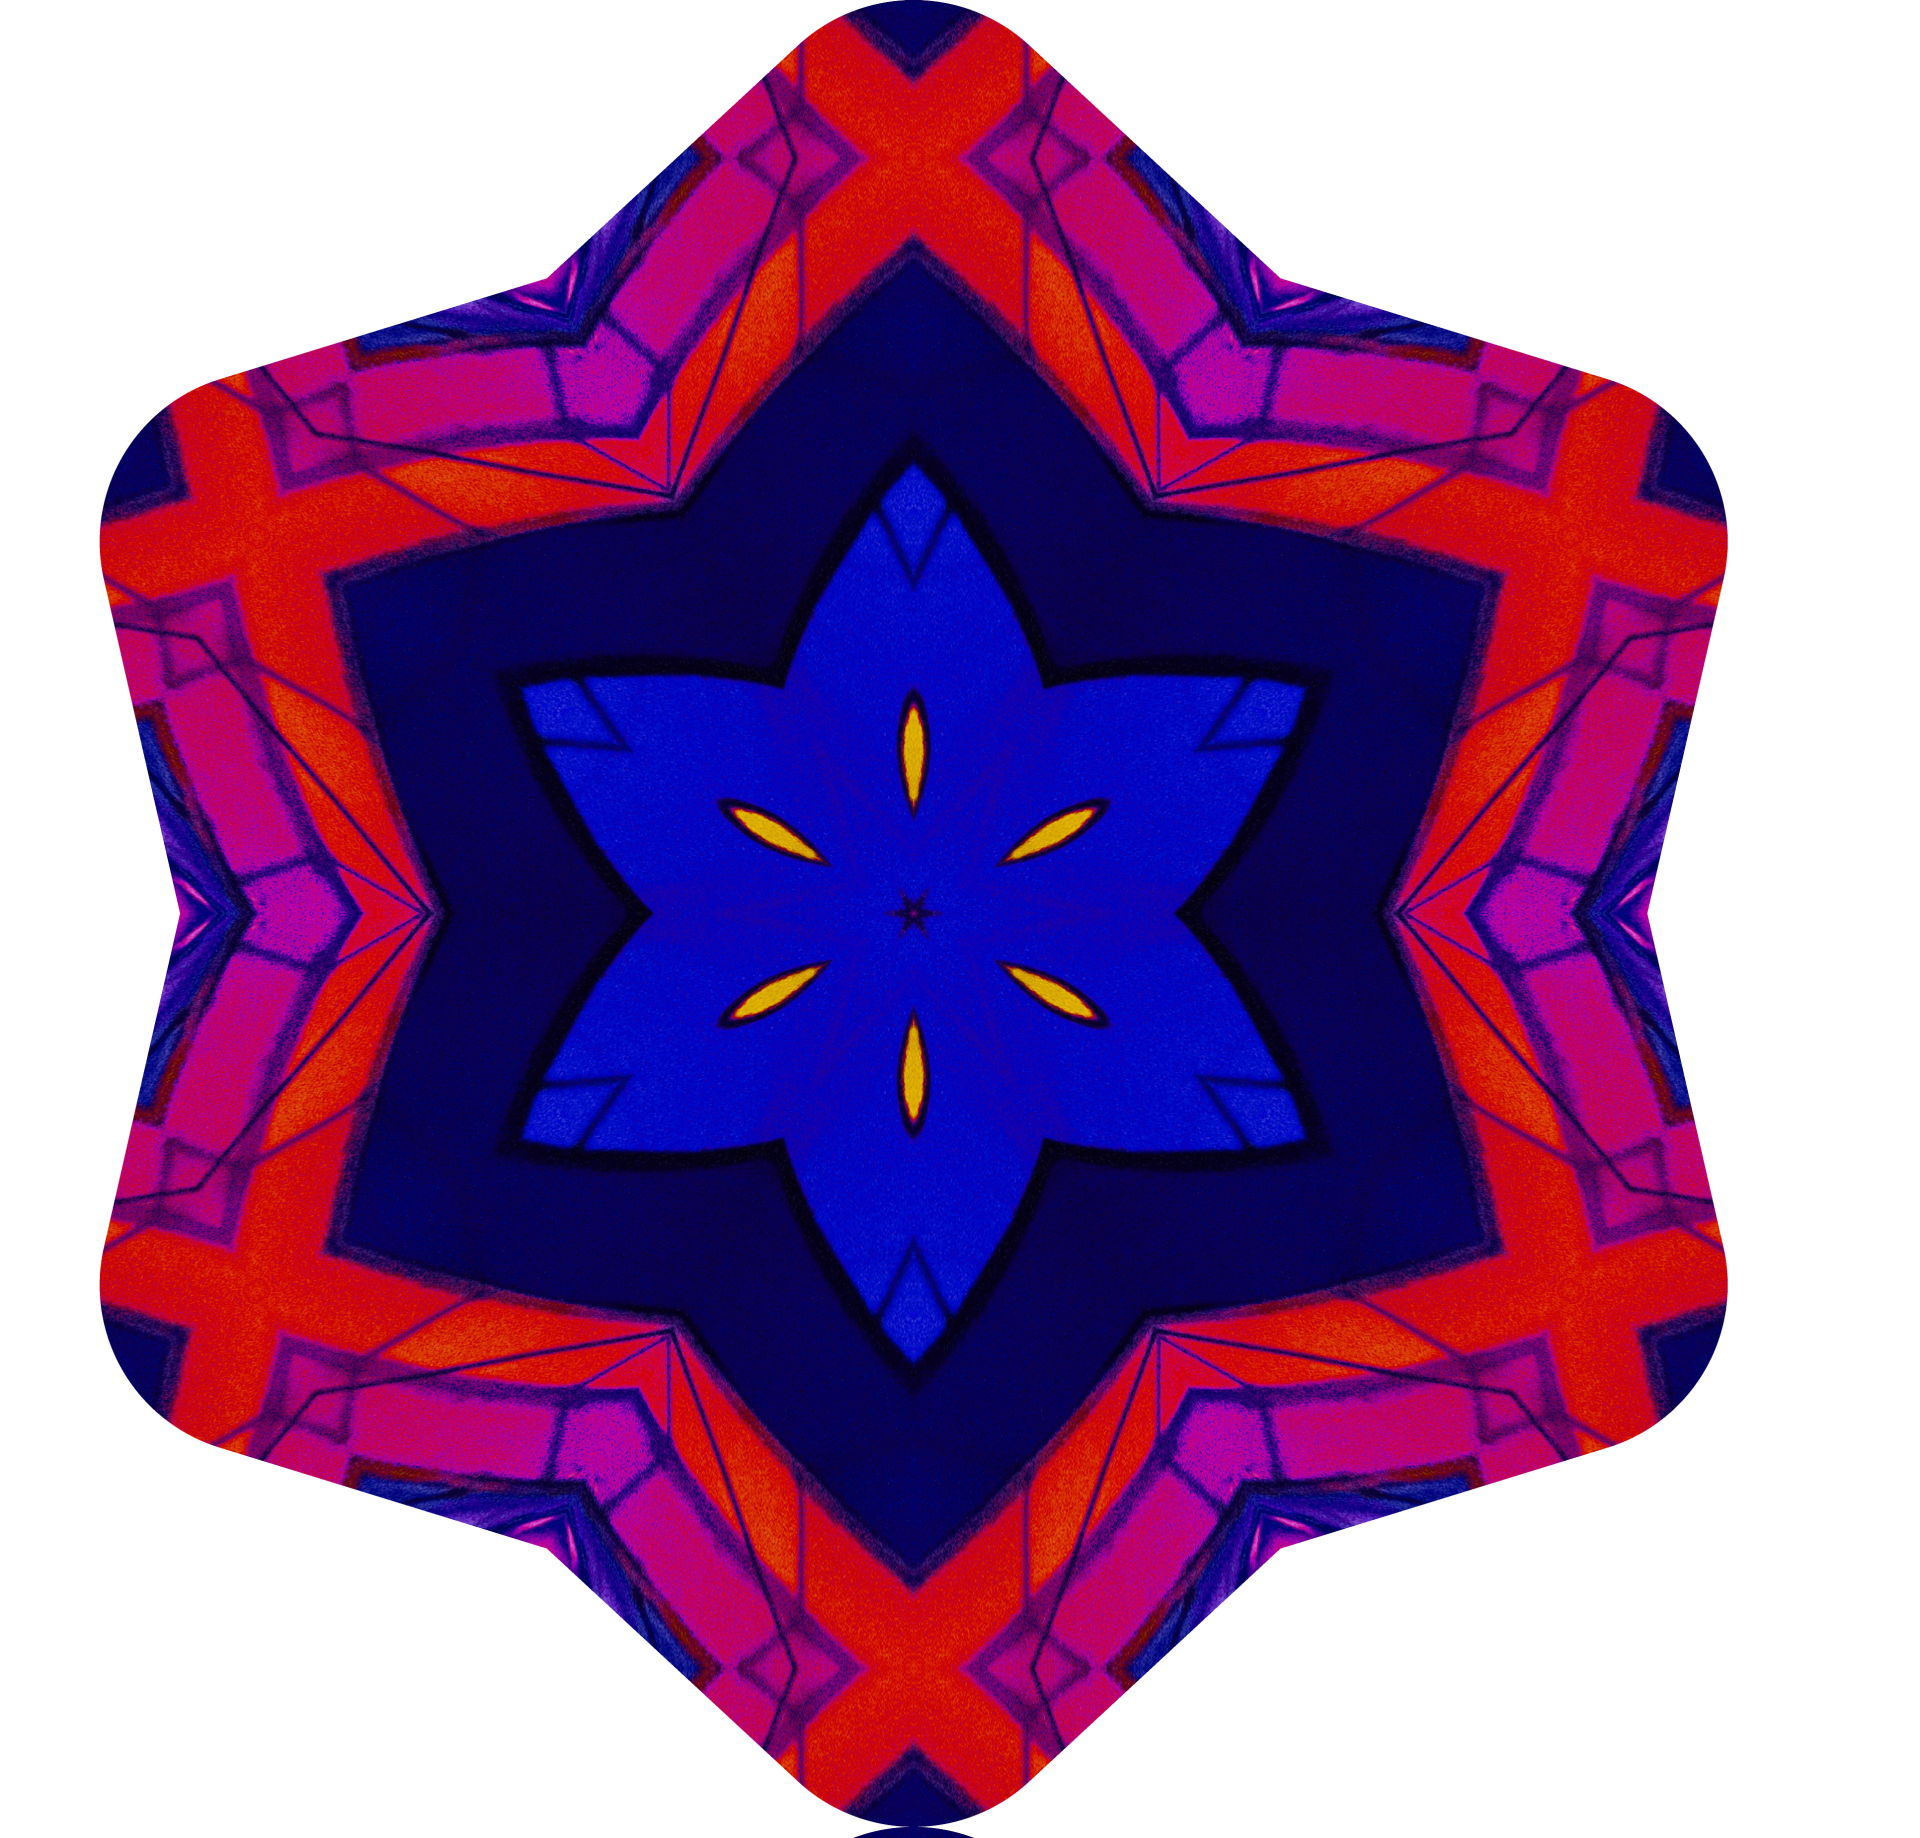 star-shaped mandala with a blue star in its center on a transparent background